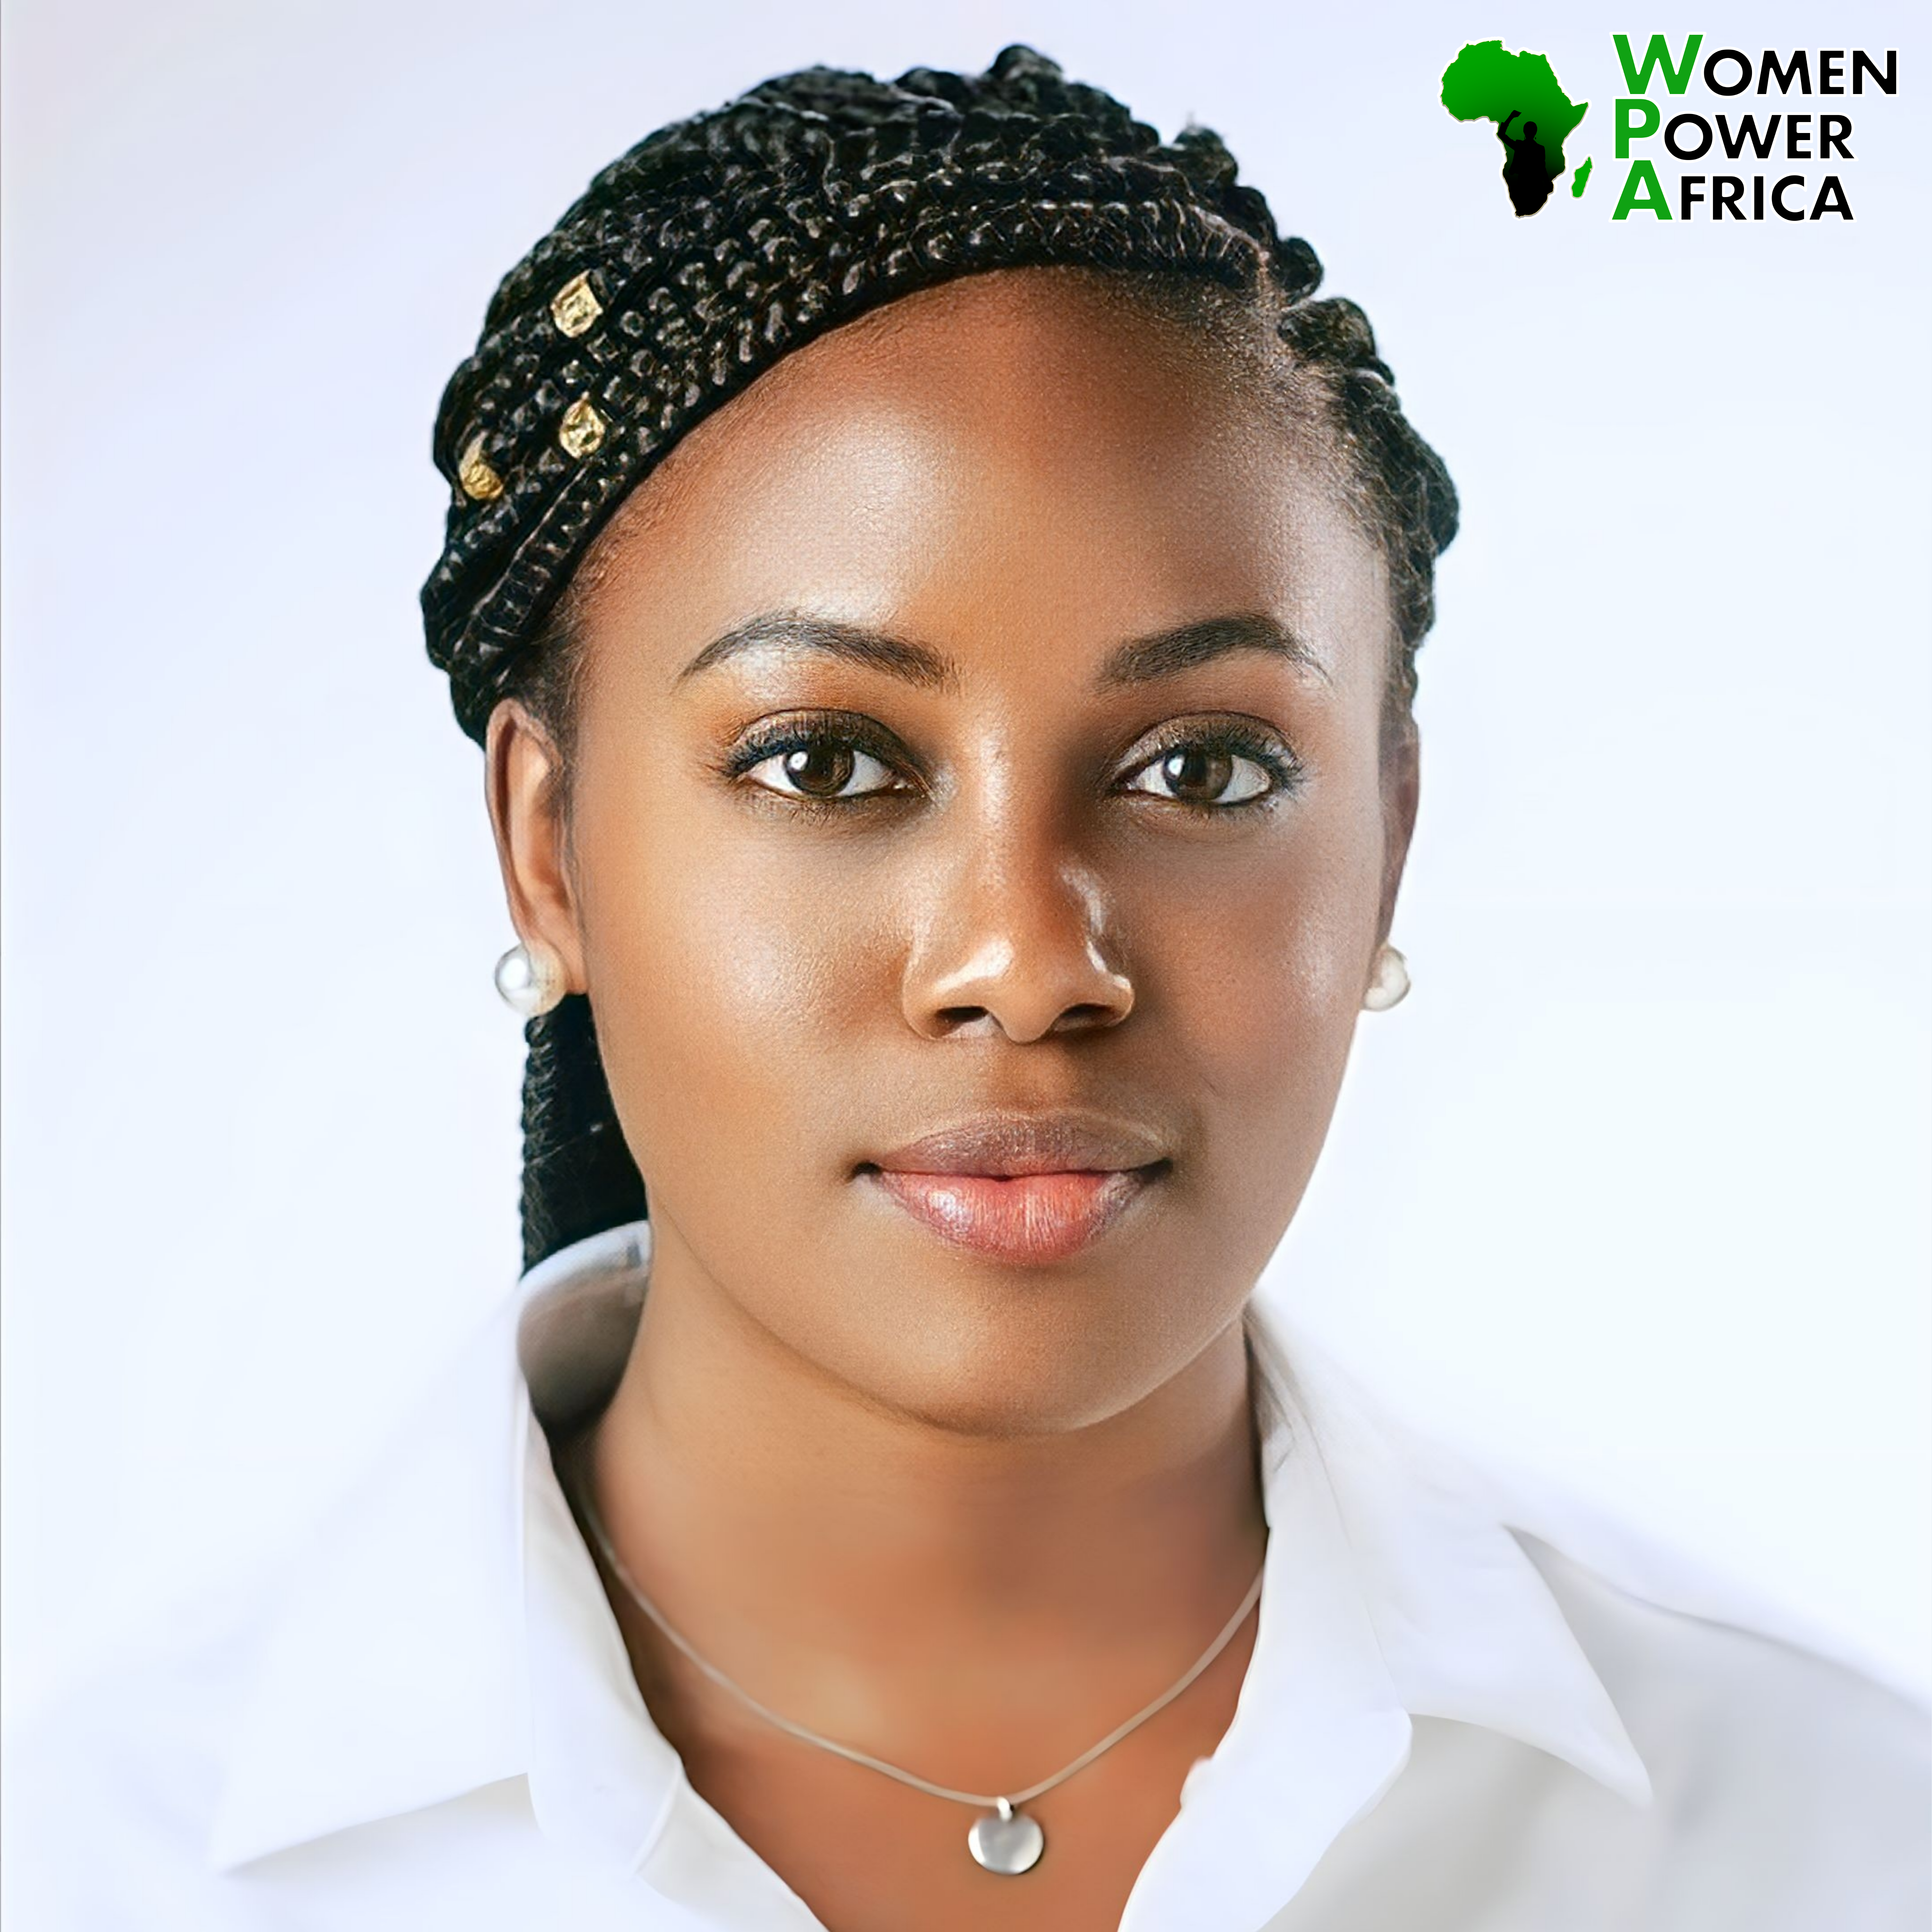 Dr. Wendy Okolo: The Remarkable Aerospace Engineer from Nigeria.